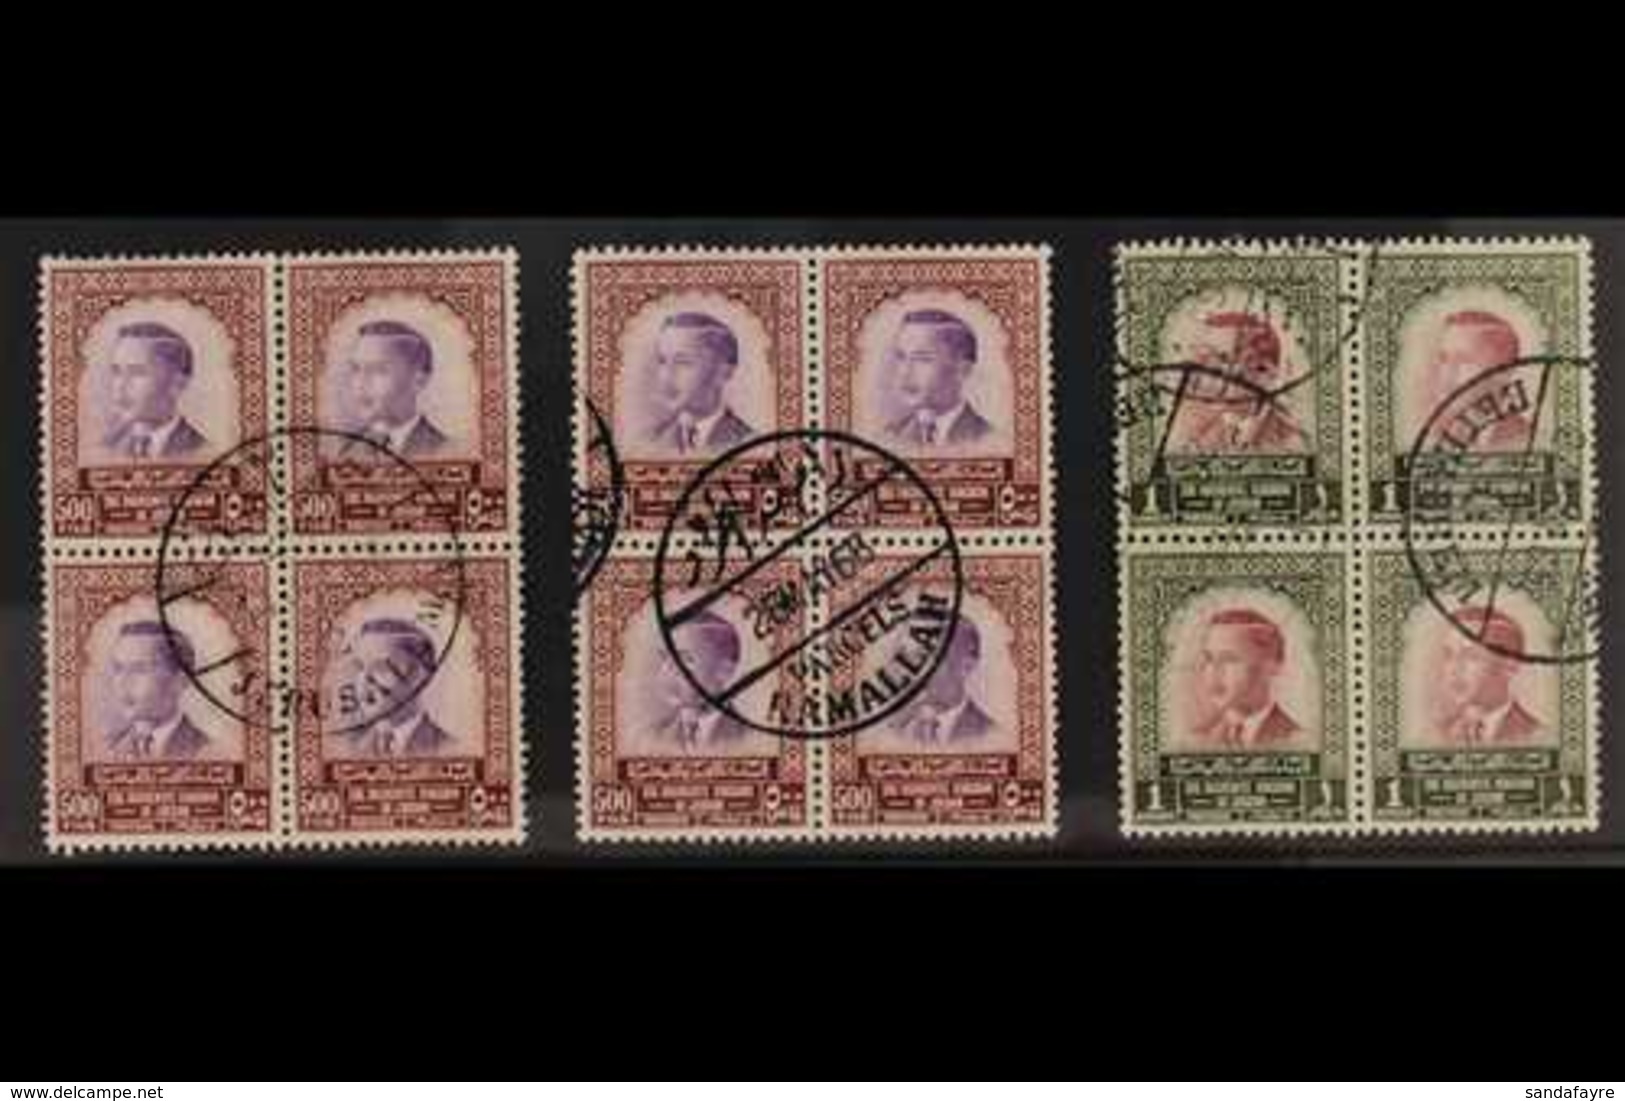 1955-65 A Trio Of USED BLOCKS OF 4 On A Stock Card, Includes Two Blocks Of 500m Purple & Red Brown "Hussein" (SG 457), O - Jordanië